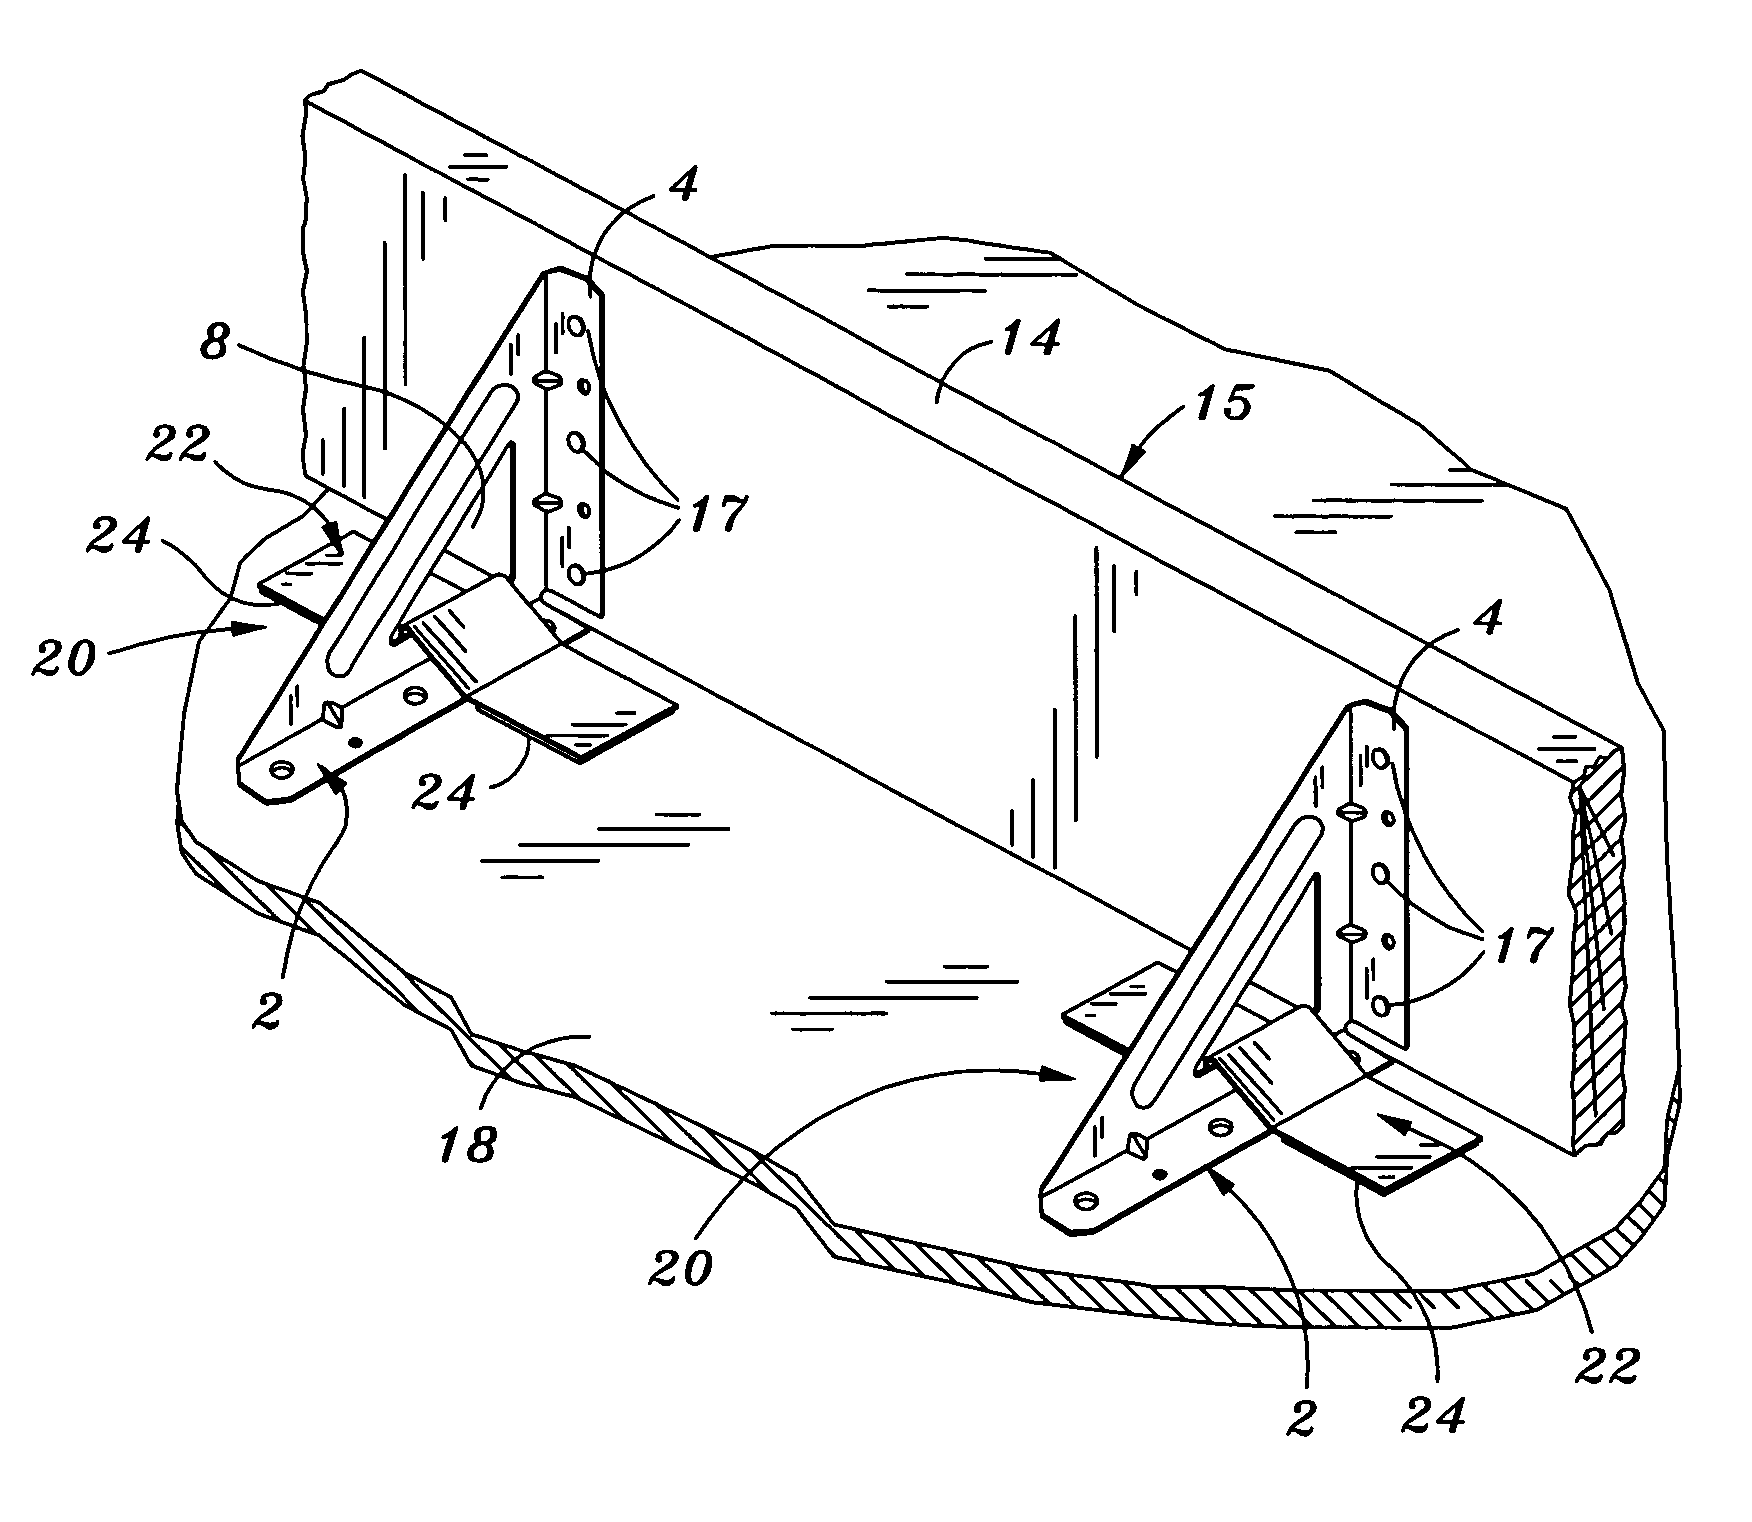 Non-destructive form brackets and methods of using the same